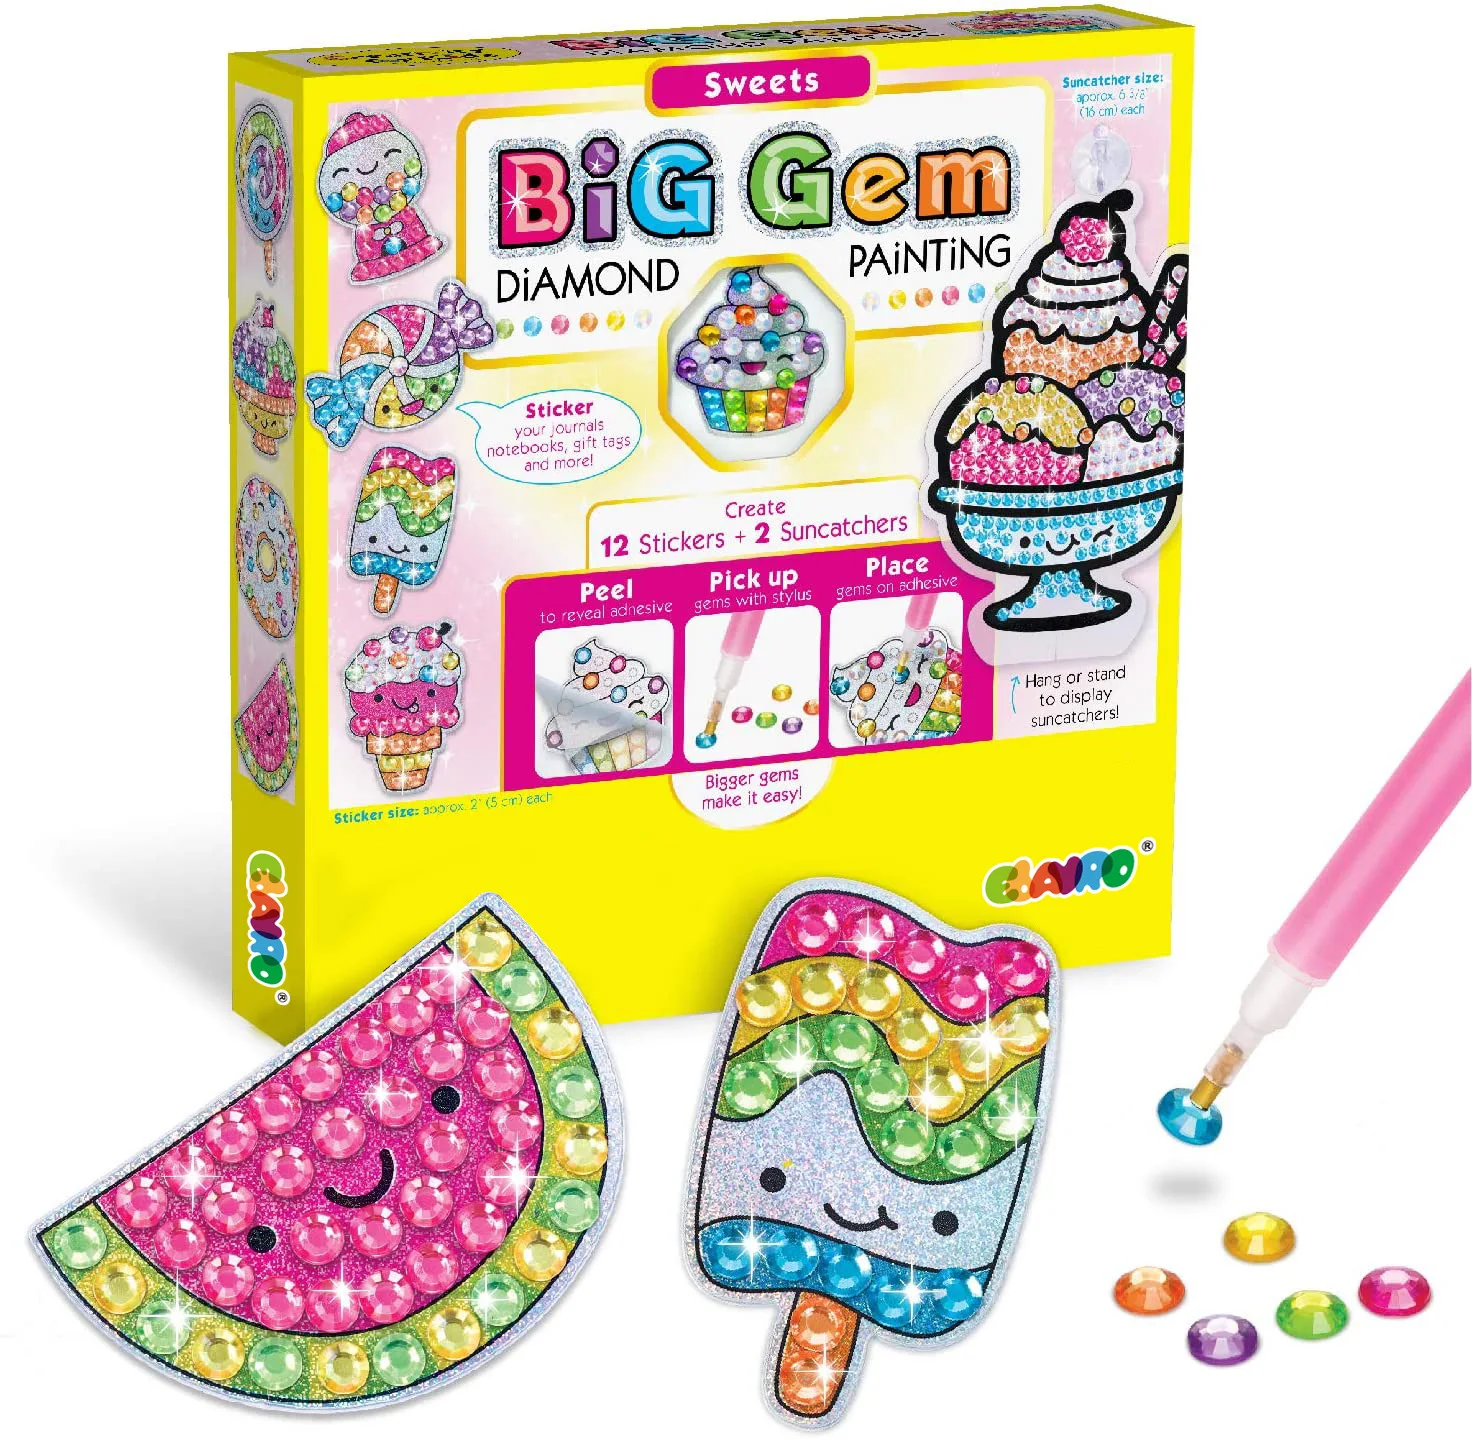 Luna Bear Big Gem Diamond Painting for Kids Creative Gift for Girls and Boys Art and Crafts Kits for Ages 6-12 Make Your own Diamond Painting Stickers with Suncatchers and Big Gem Stickers 